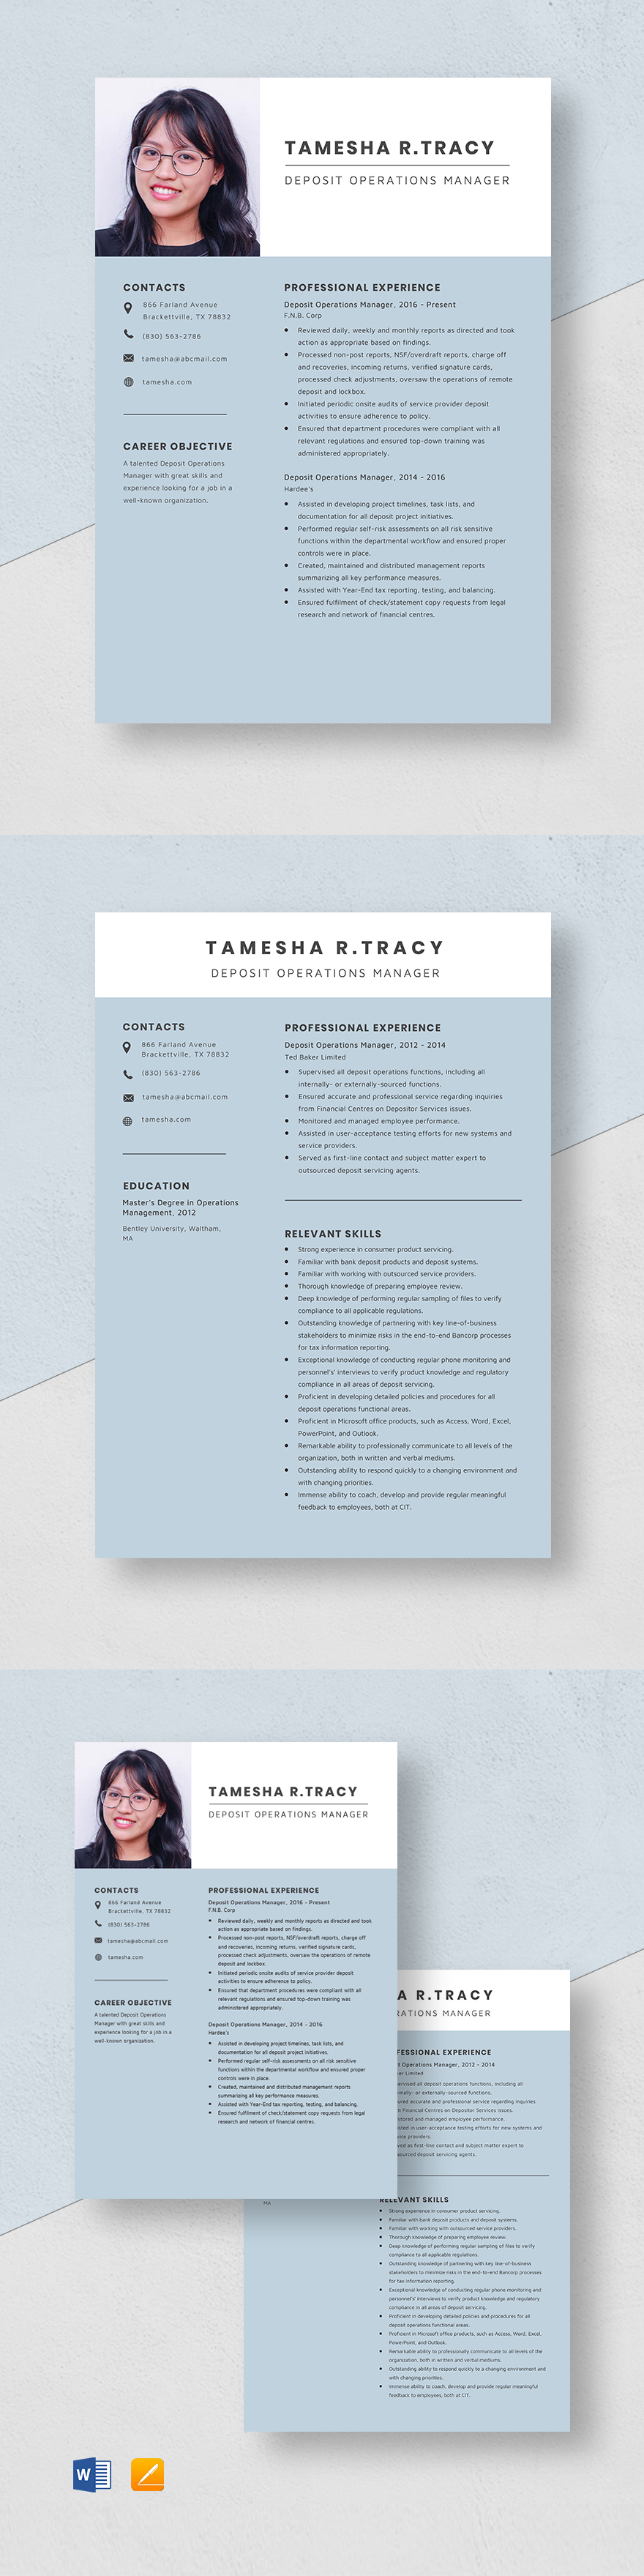 Deposit Operations Manager Resume Template